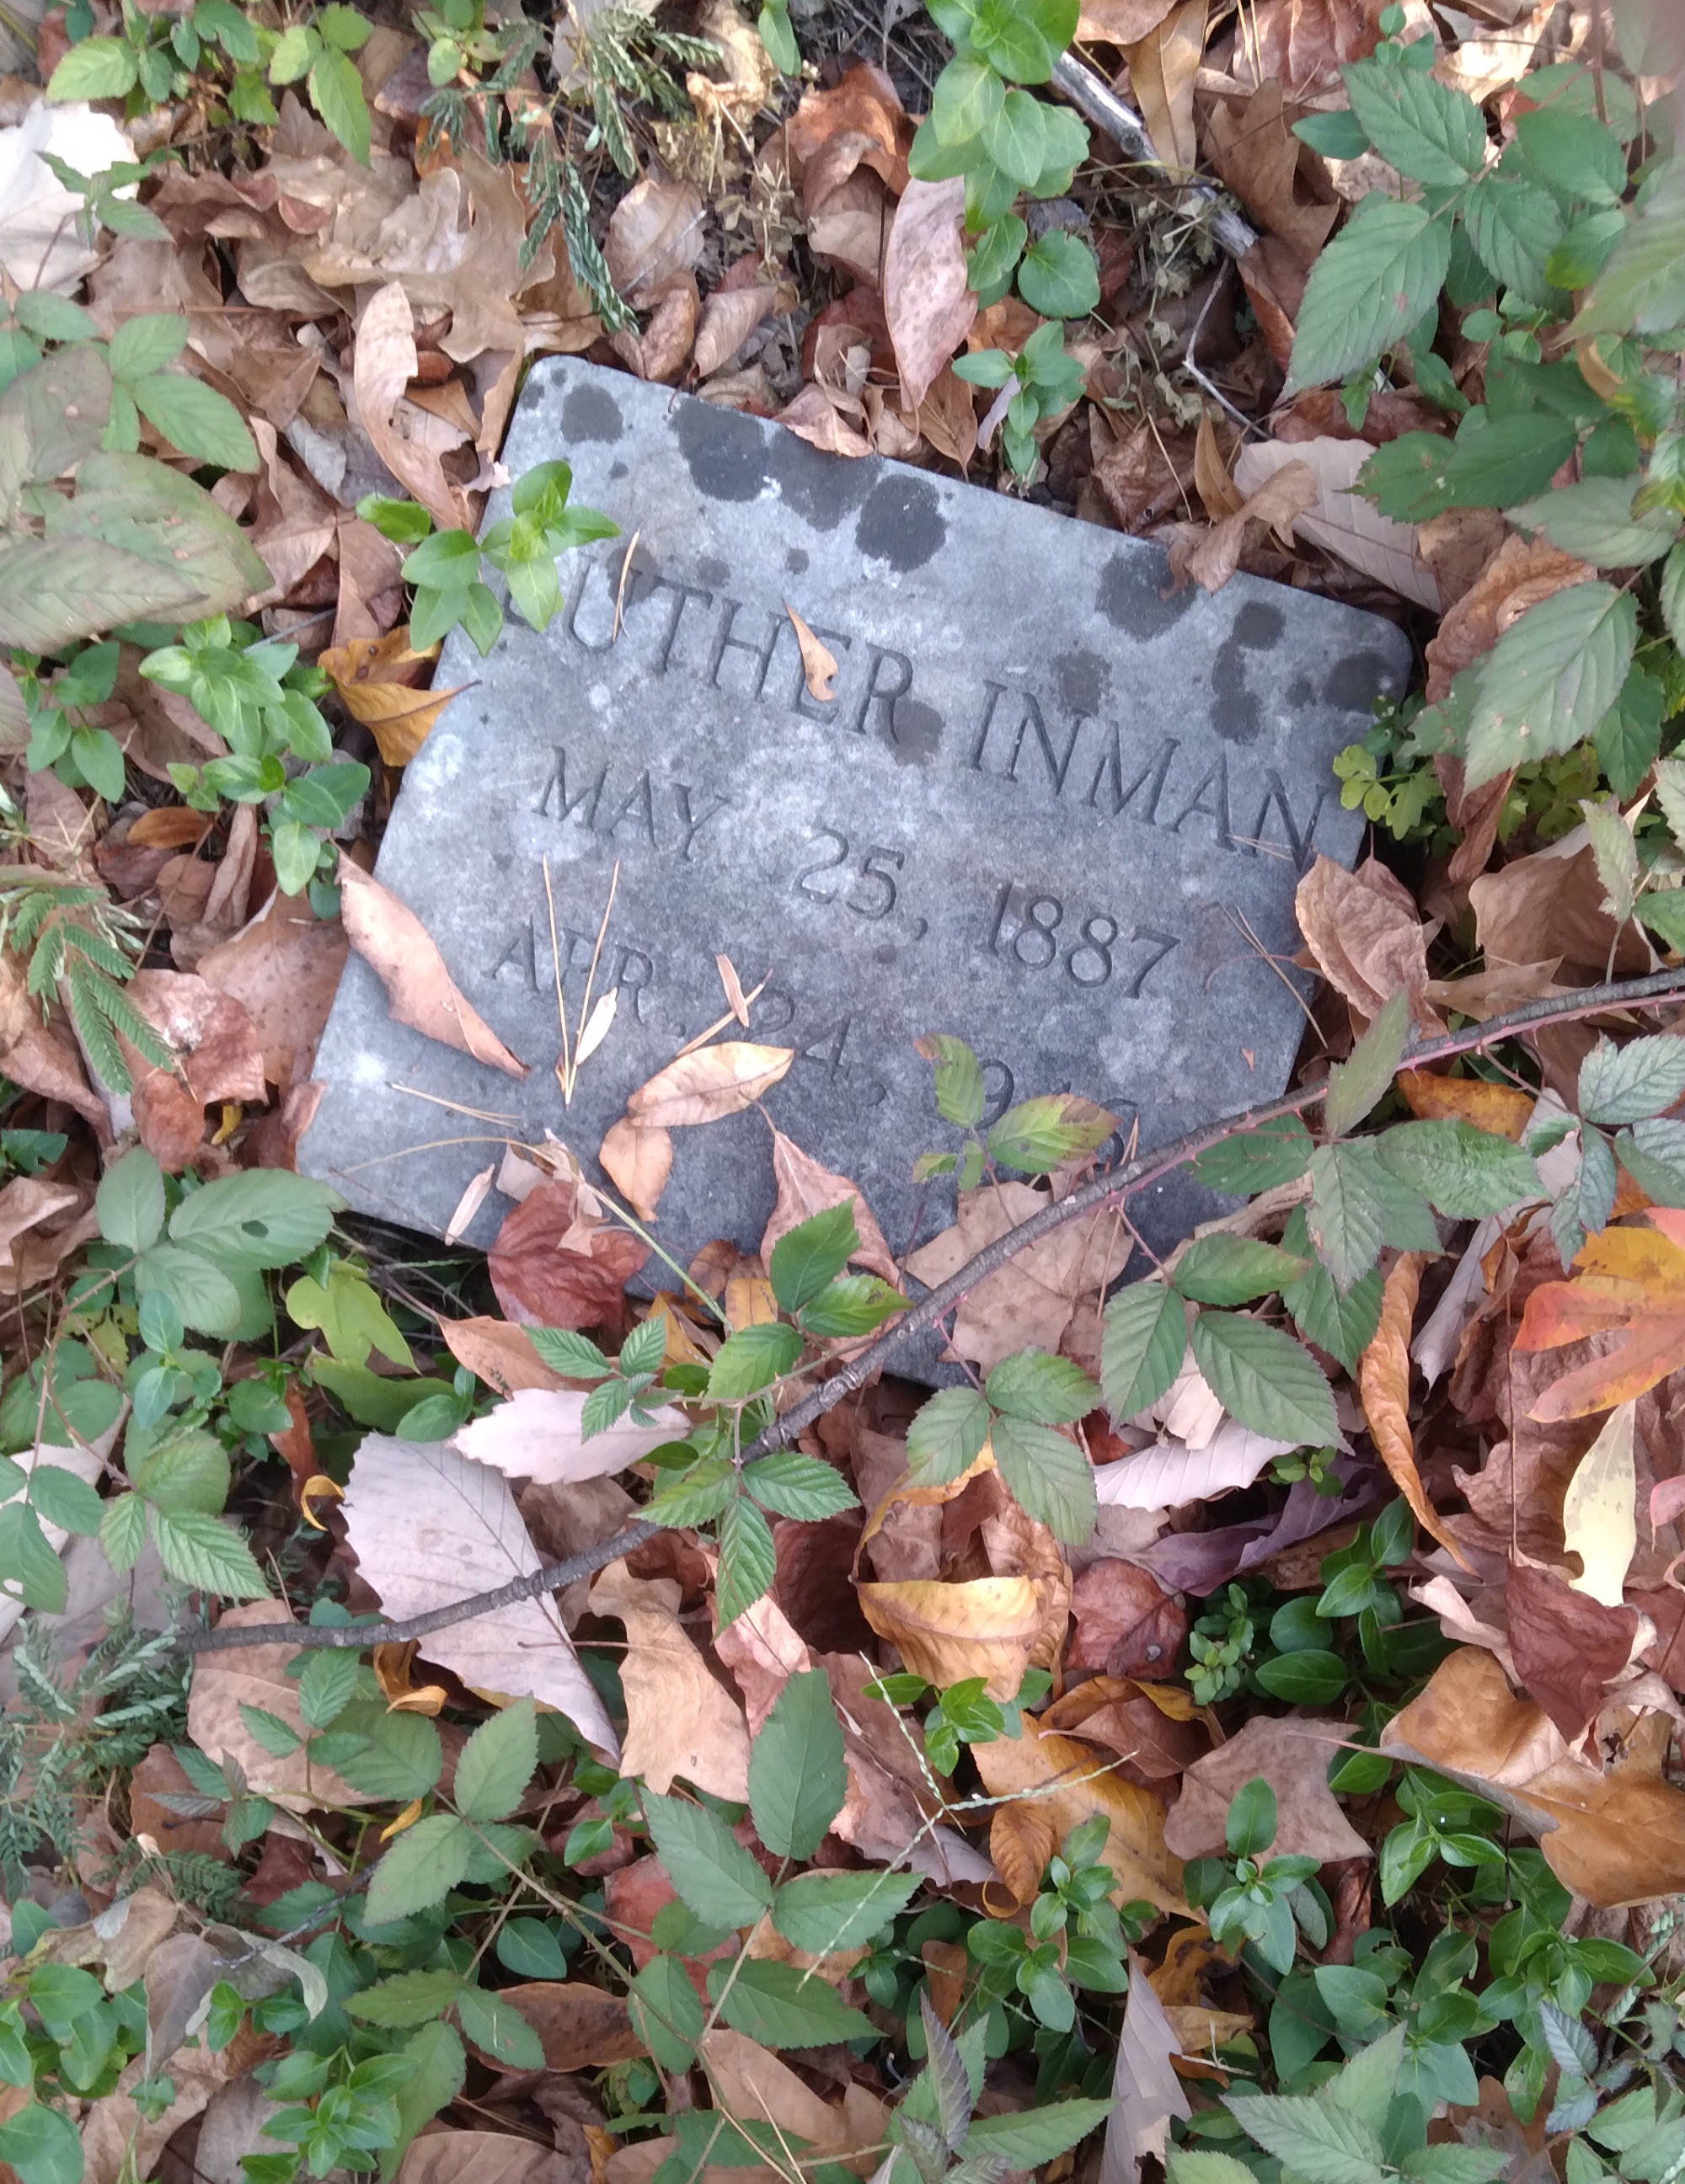 Luther Inman grave. Buck Knob Cemetery, Dartmouth Street, Chattanooga, Tennessee.